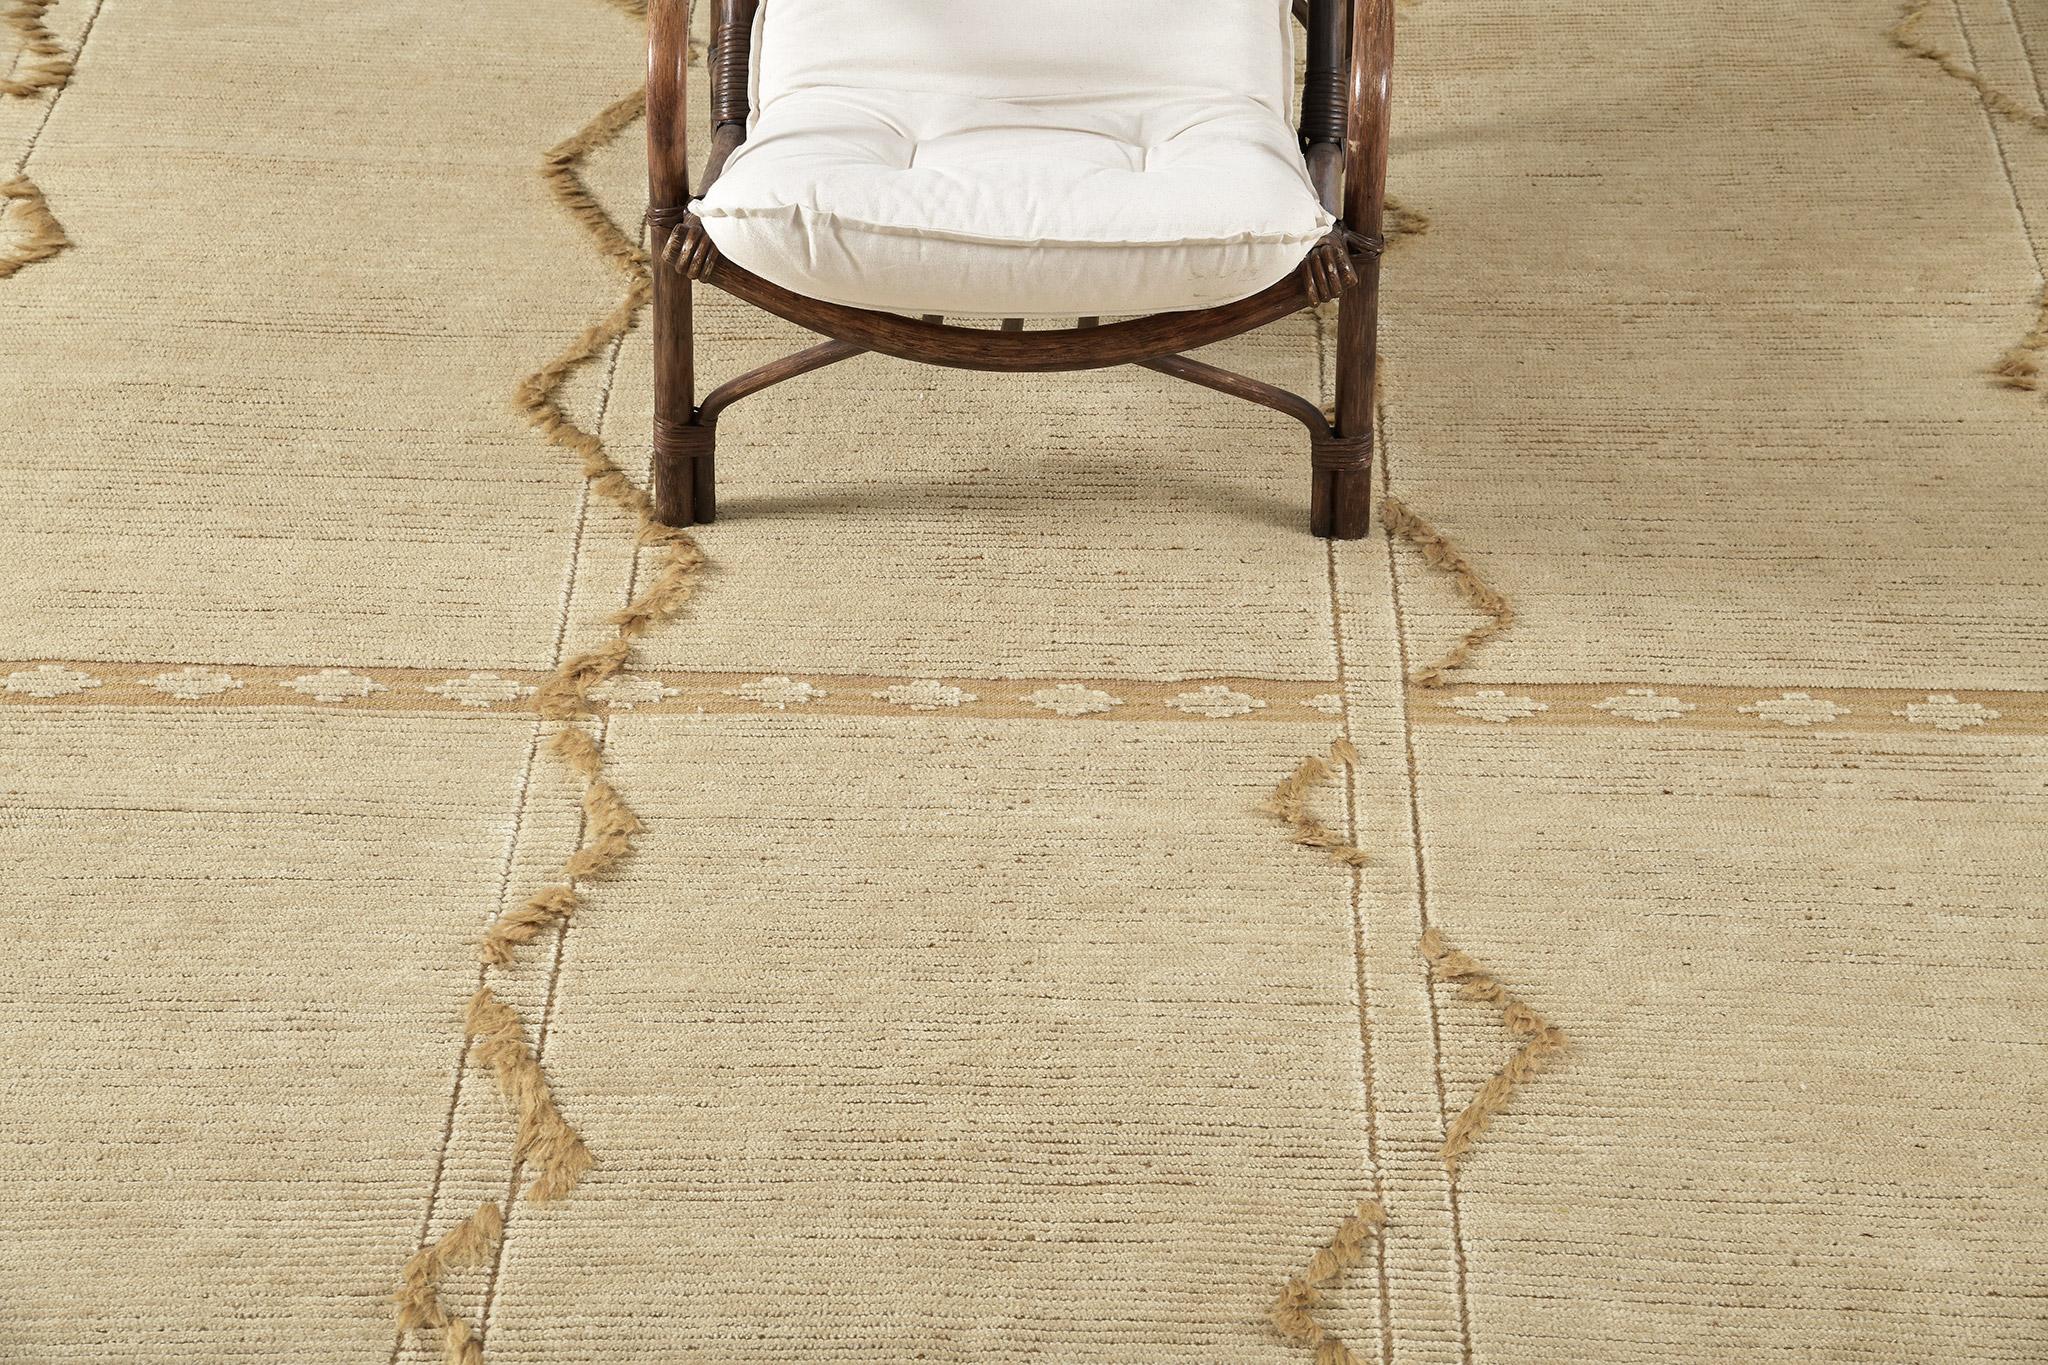 Verdot’ in Estancia collection is an exquisite home decor that features a captivating design through this beige and camel colour. With its interesting flow and stunning embossed details, plays a huge factor in establishing the rug's overall stunning